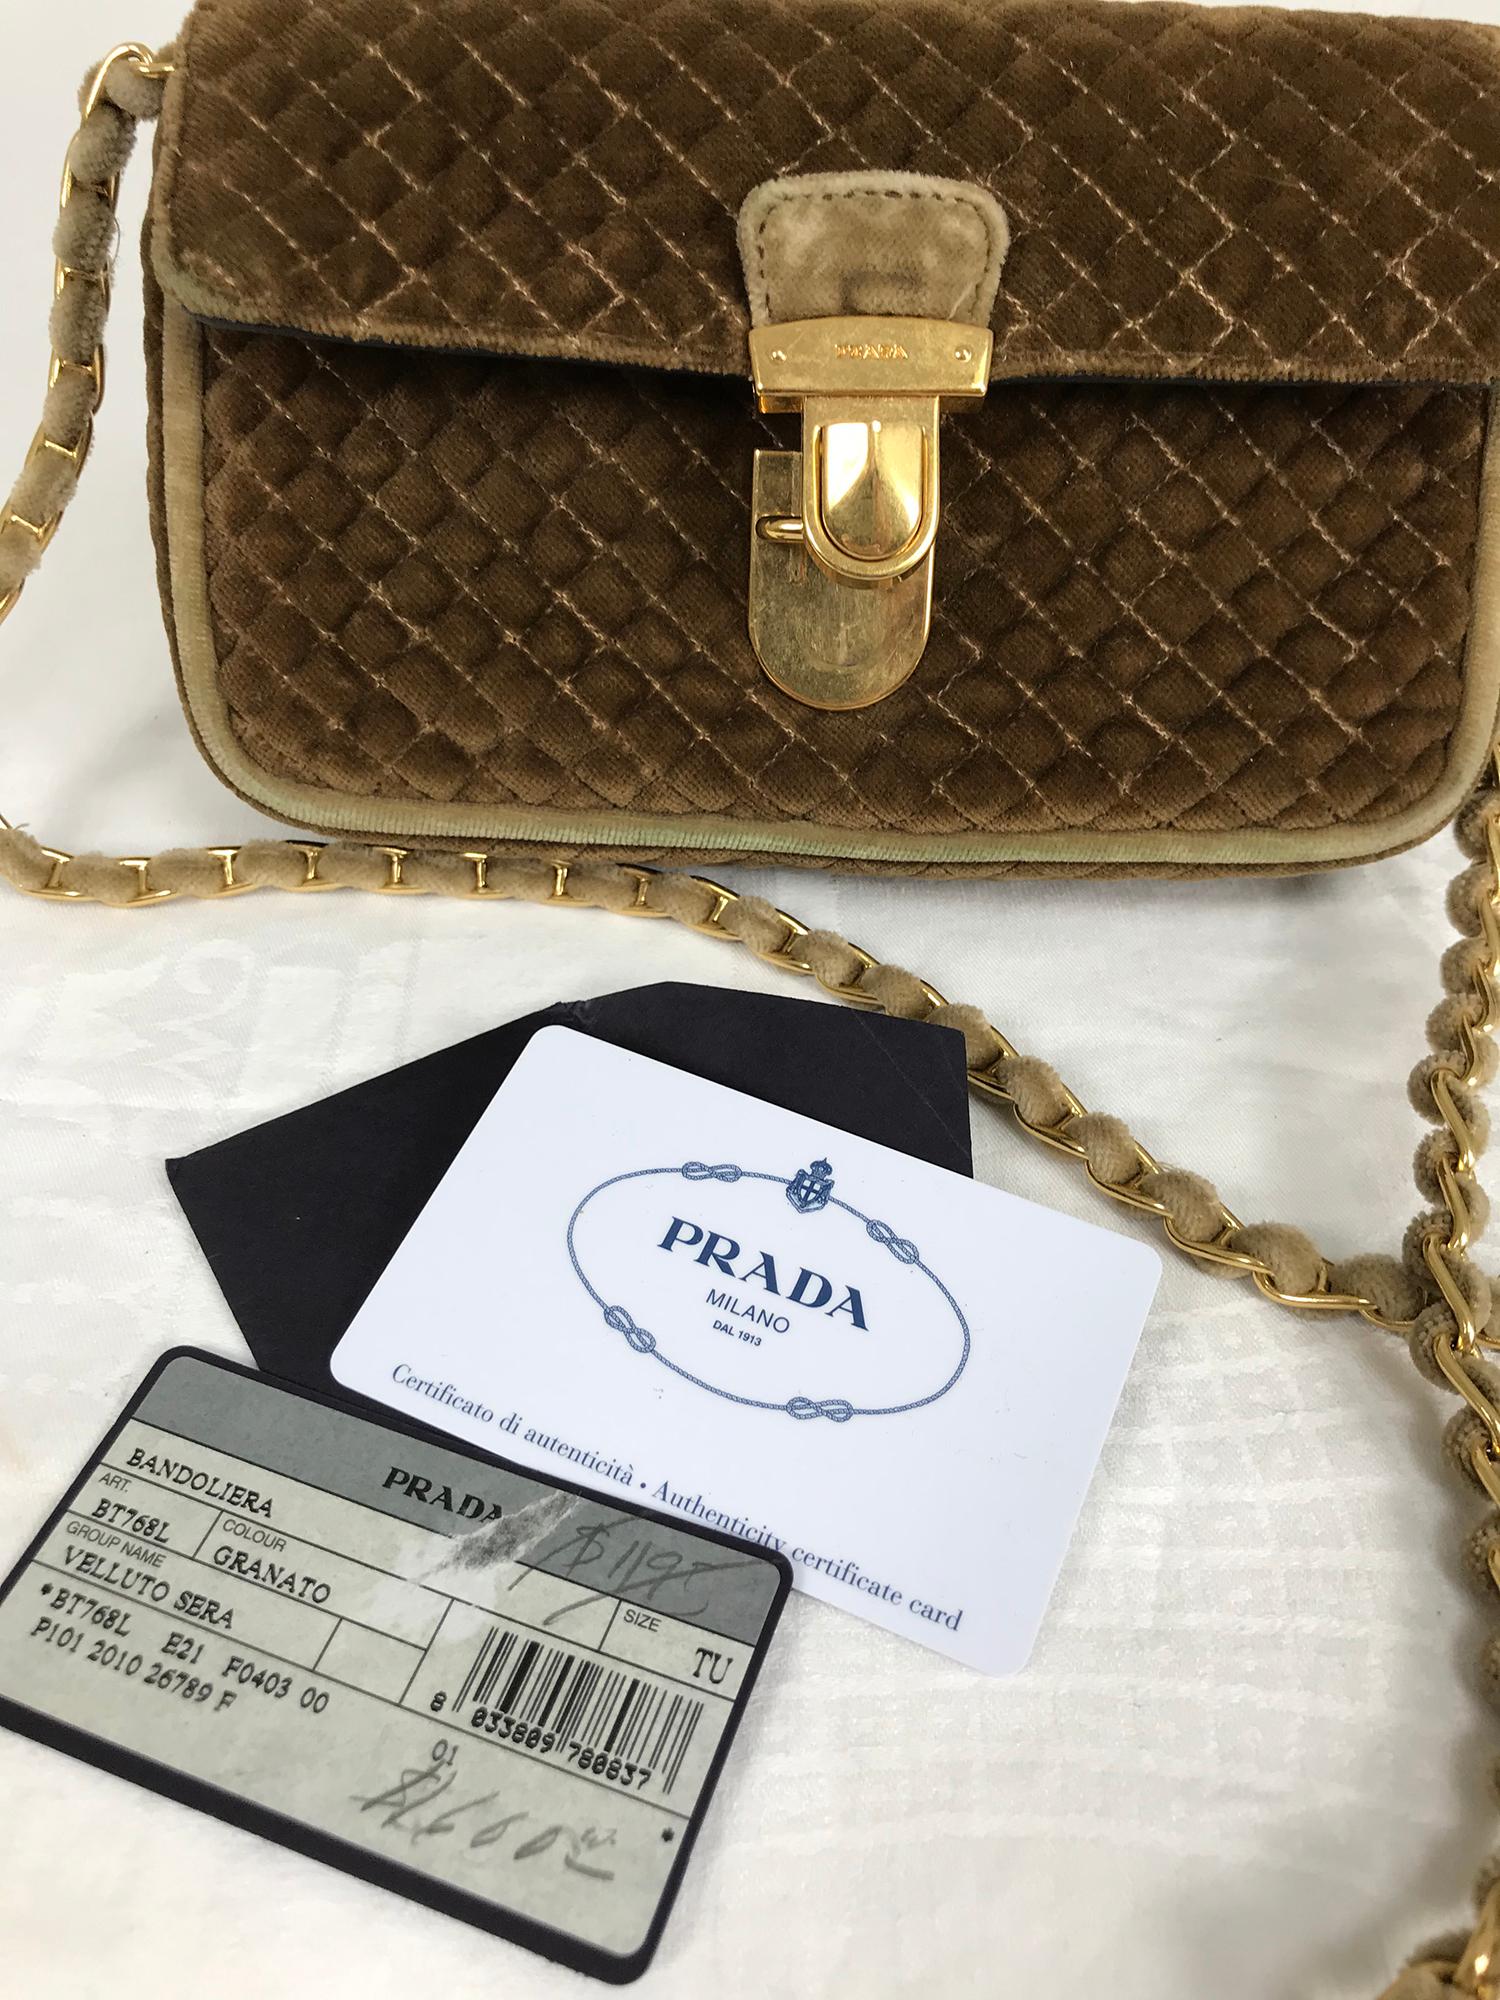 Prada quilted caramel tan velvet flap front, cross body handbag with with coordinating lighter velvet trim and woven through gold metal chain with gold metal logo front closure. The bag is just barely large enough to hold an iPhone 11. In very good